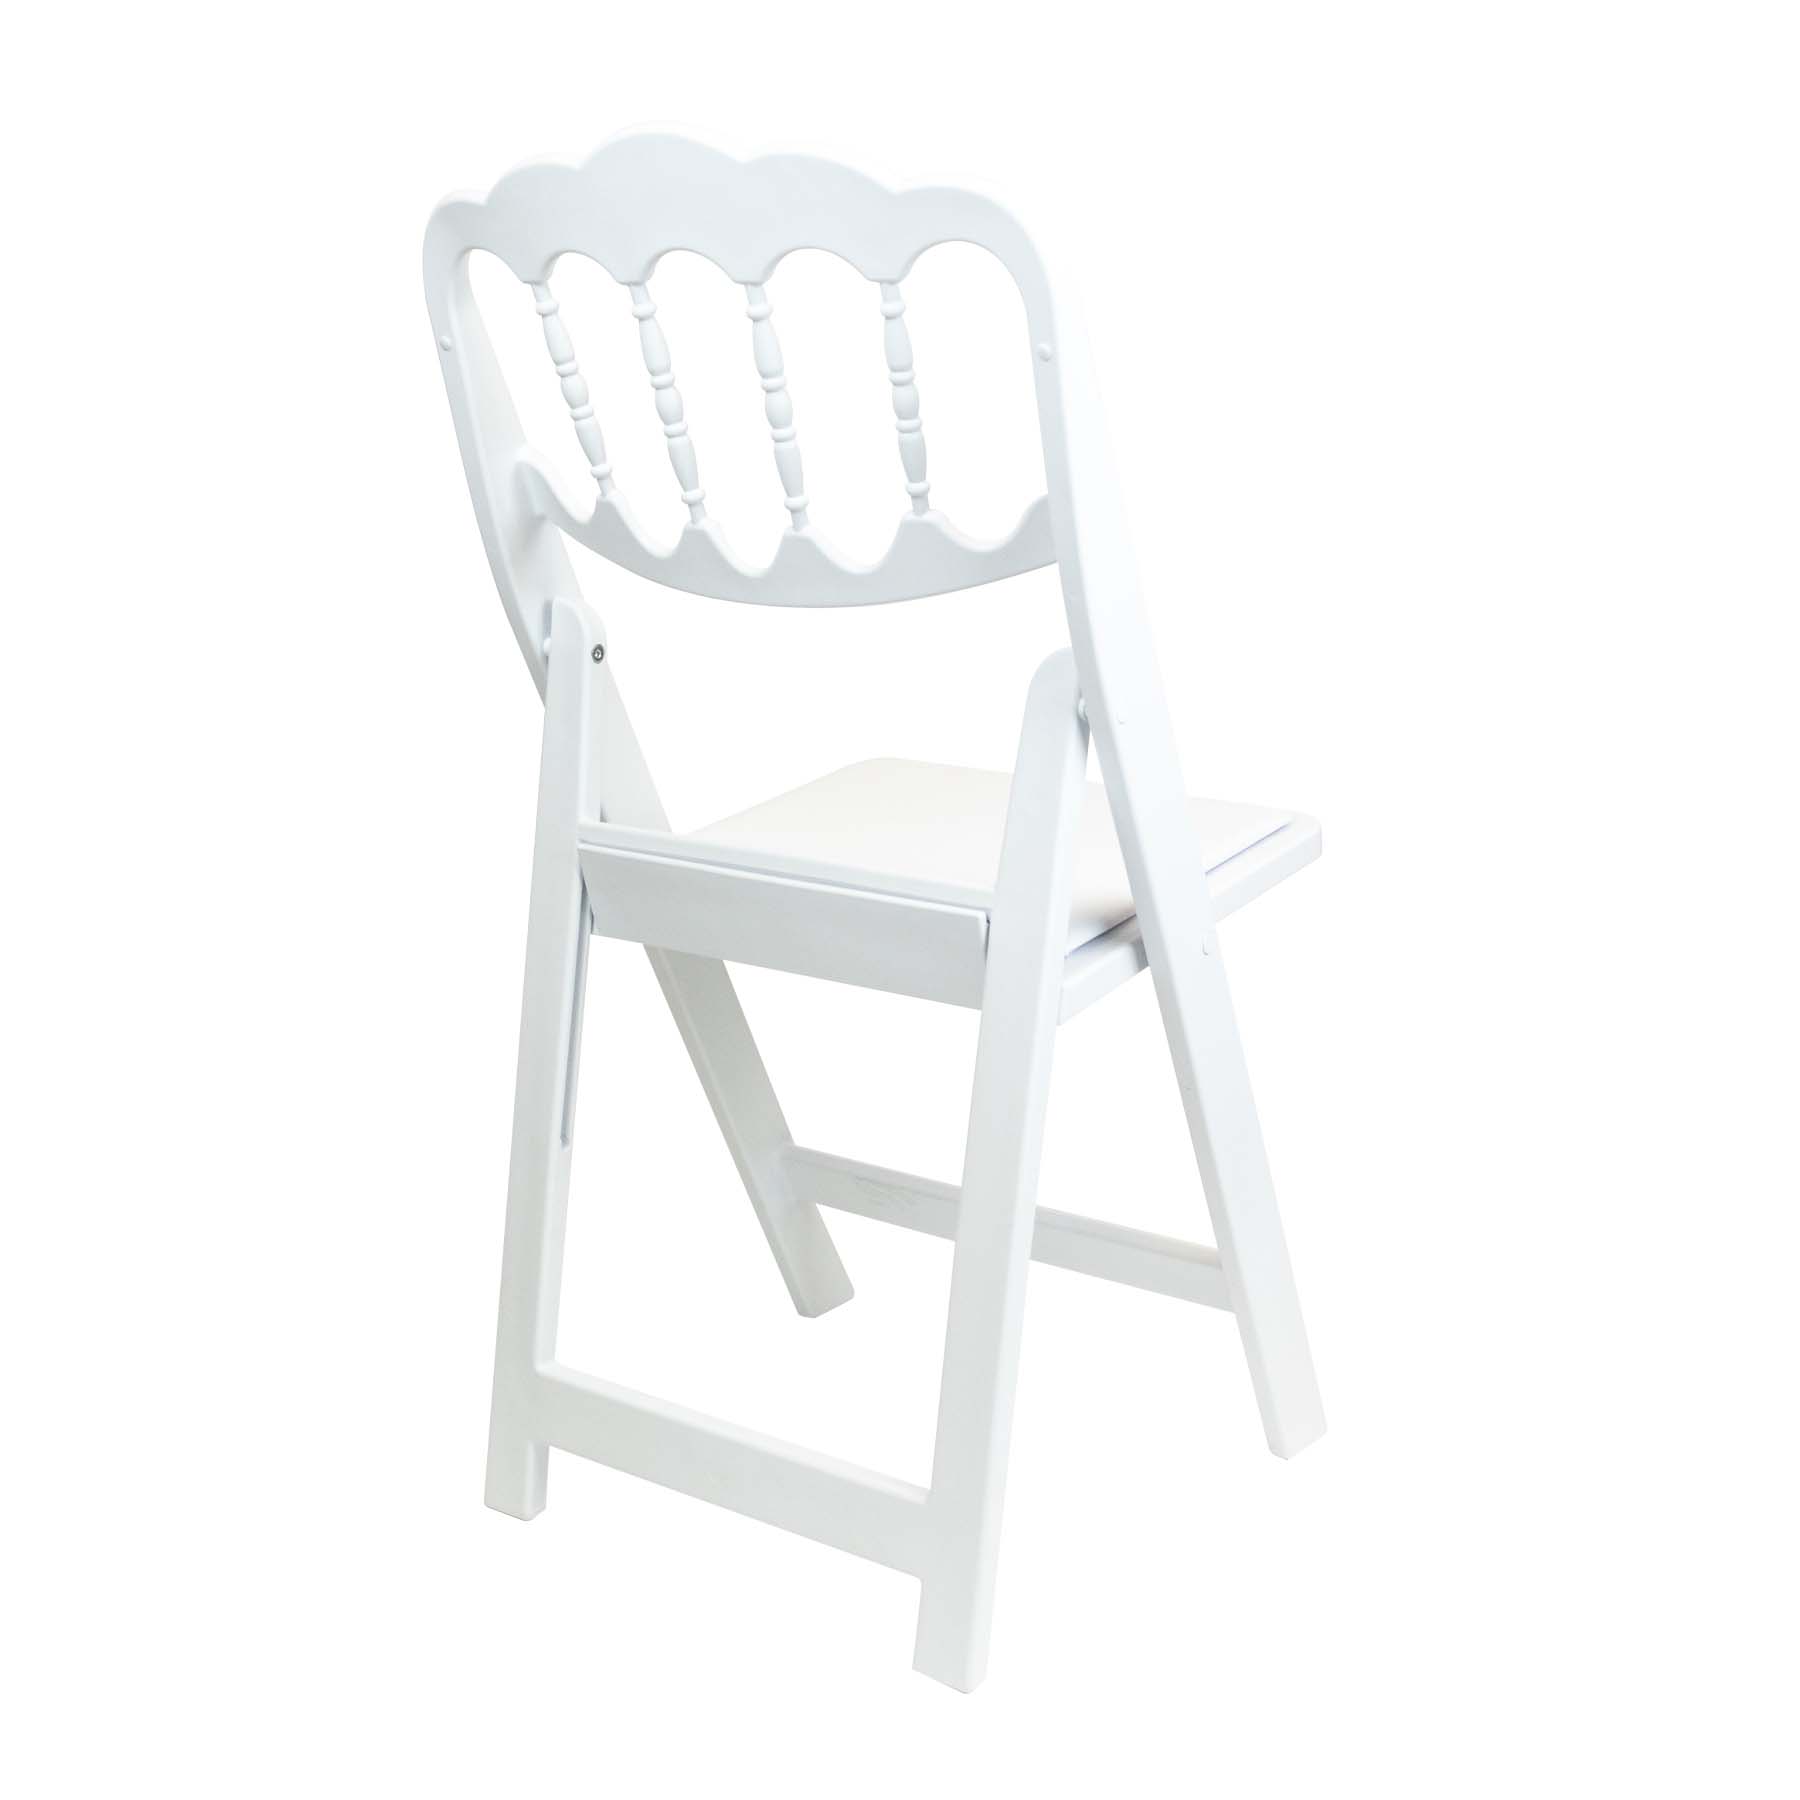 Napoleon Americana Chair The Iconic Event Chair With A Twist